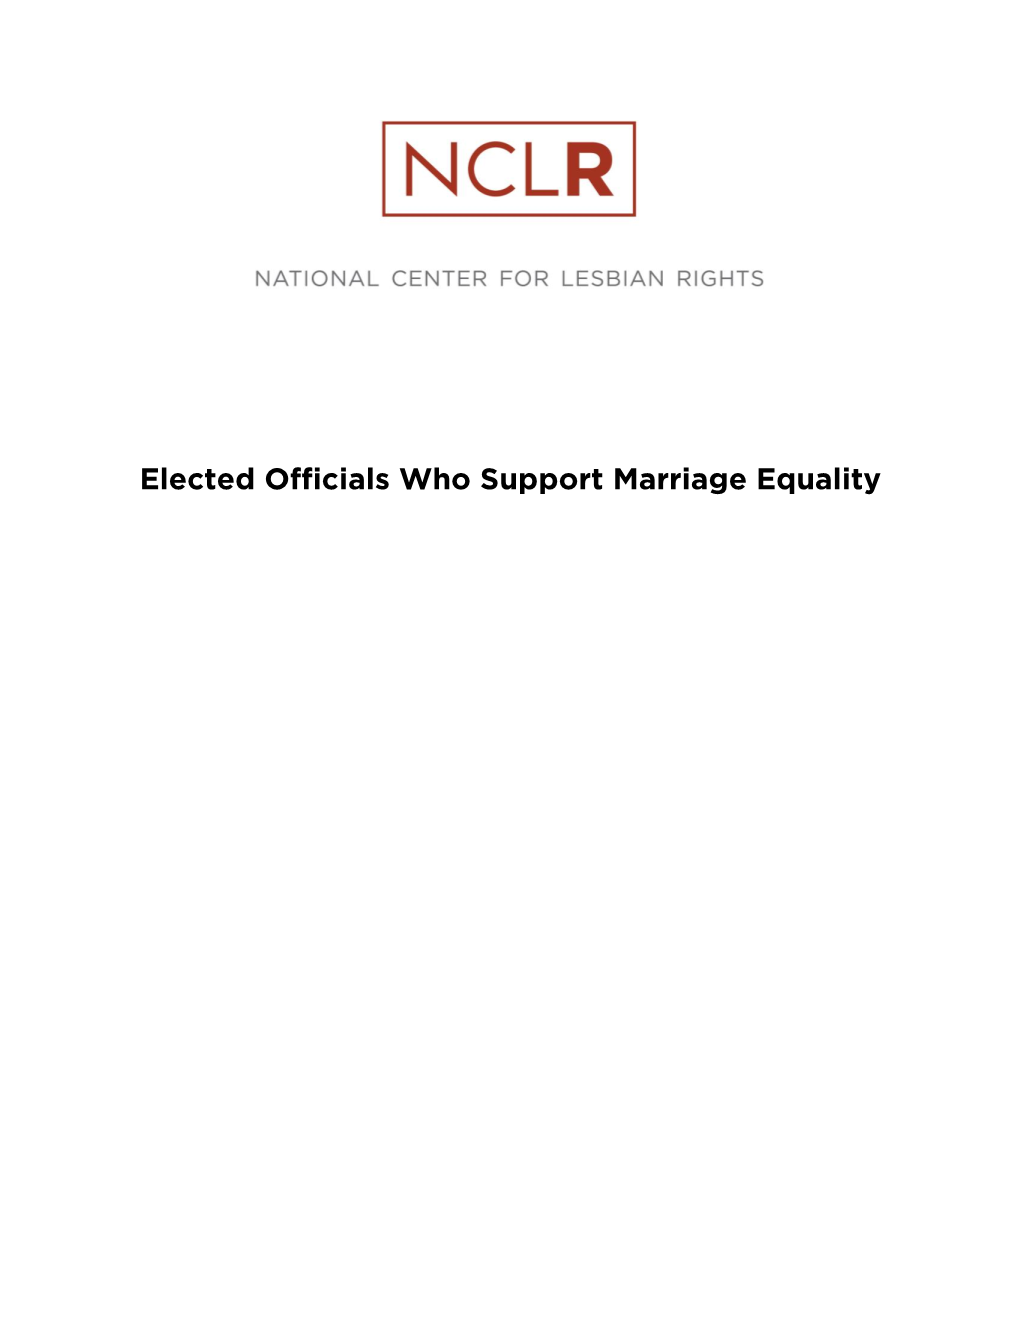 Elected Officials Who Support Marriage Equality ELECTED OFFICIALS WHO SUPPORT MARRIAGE EQUALITY